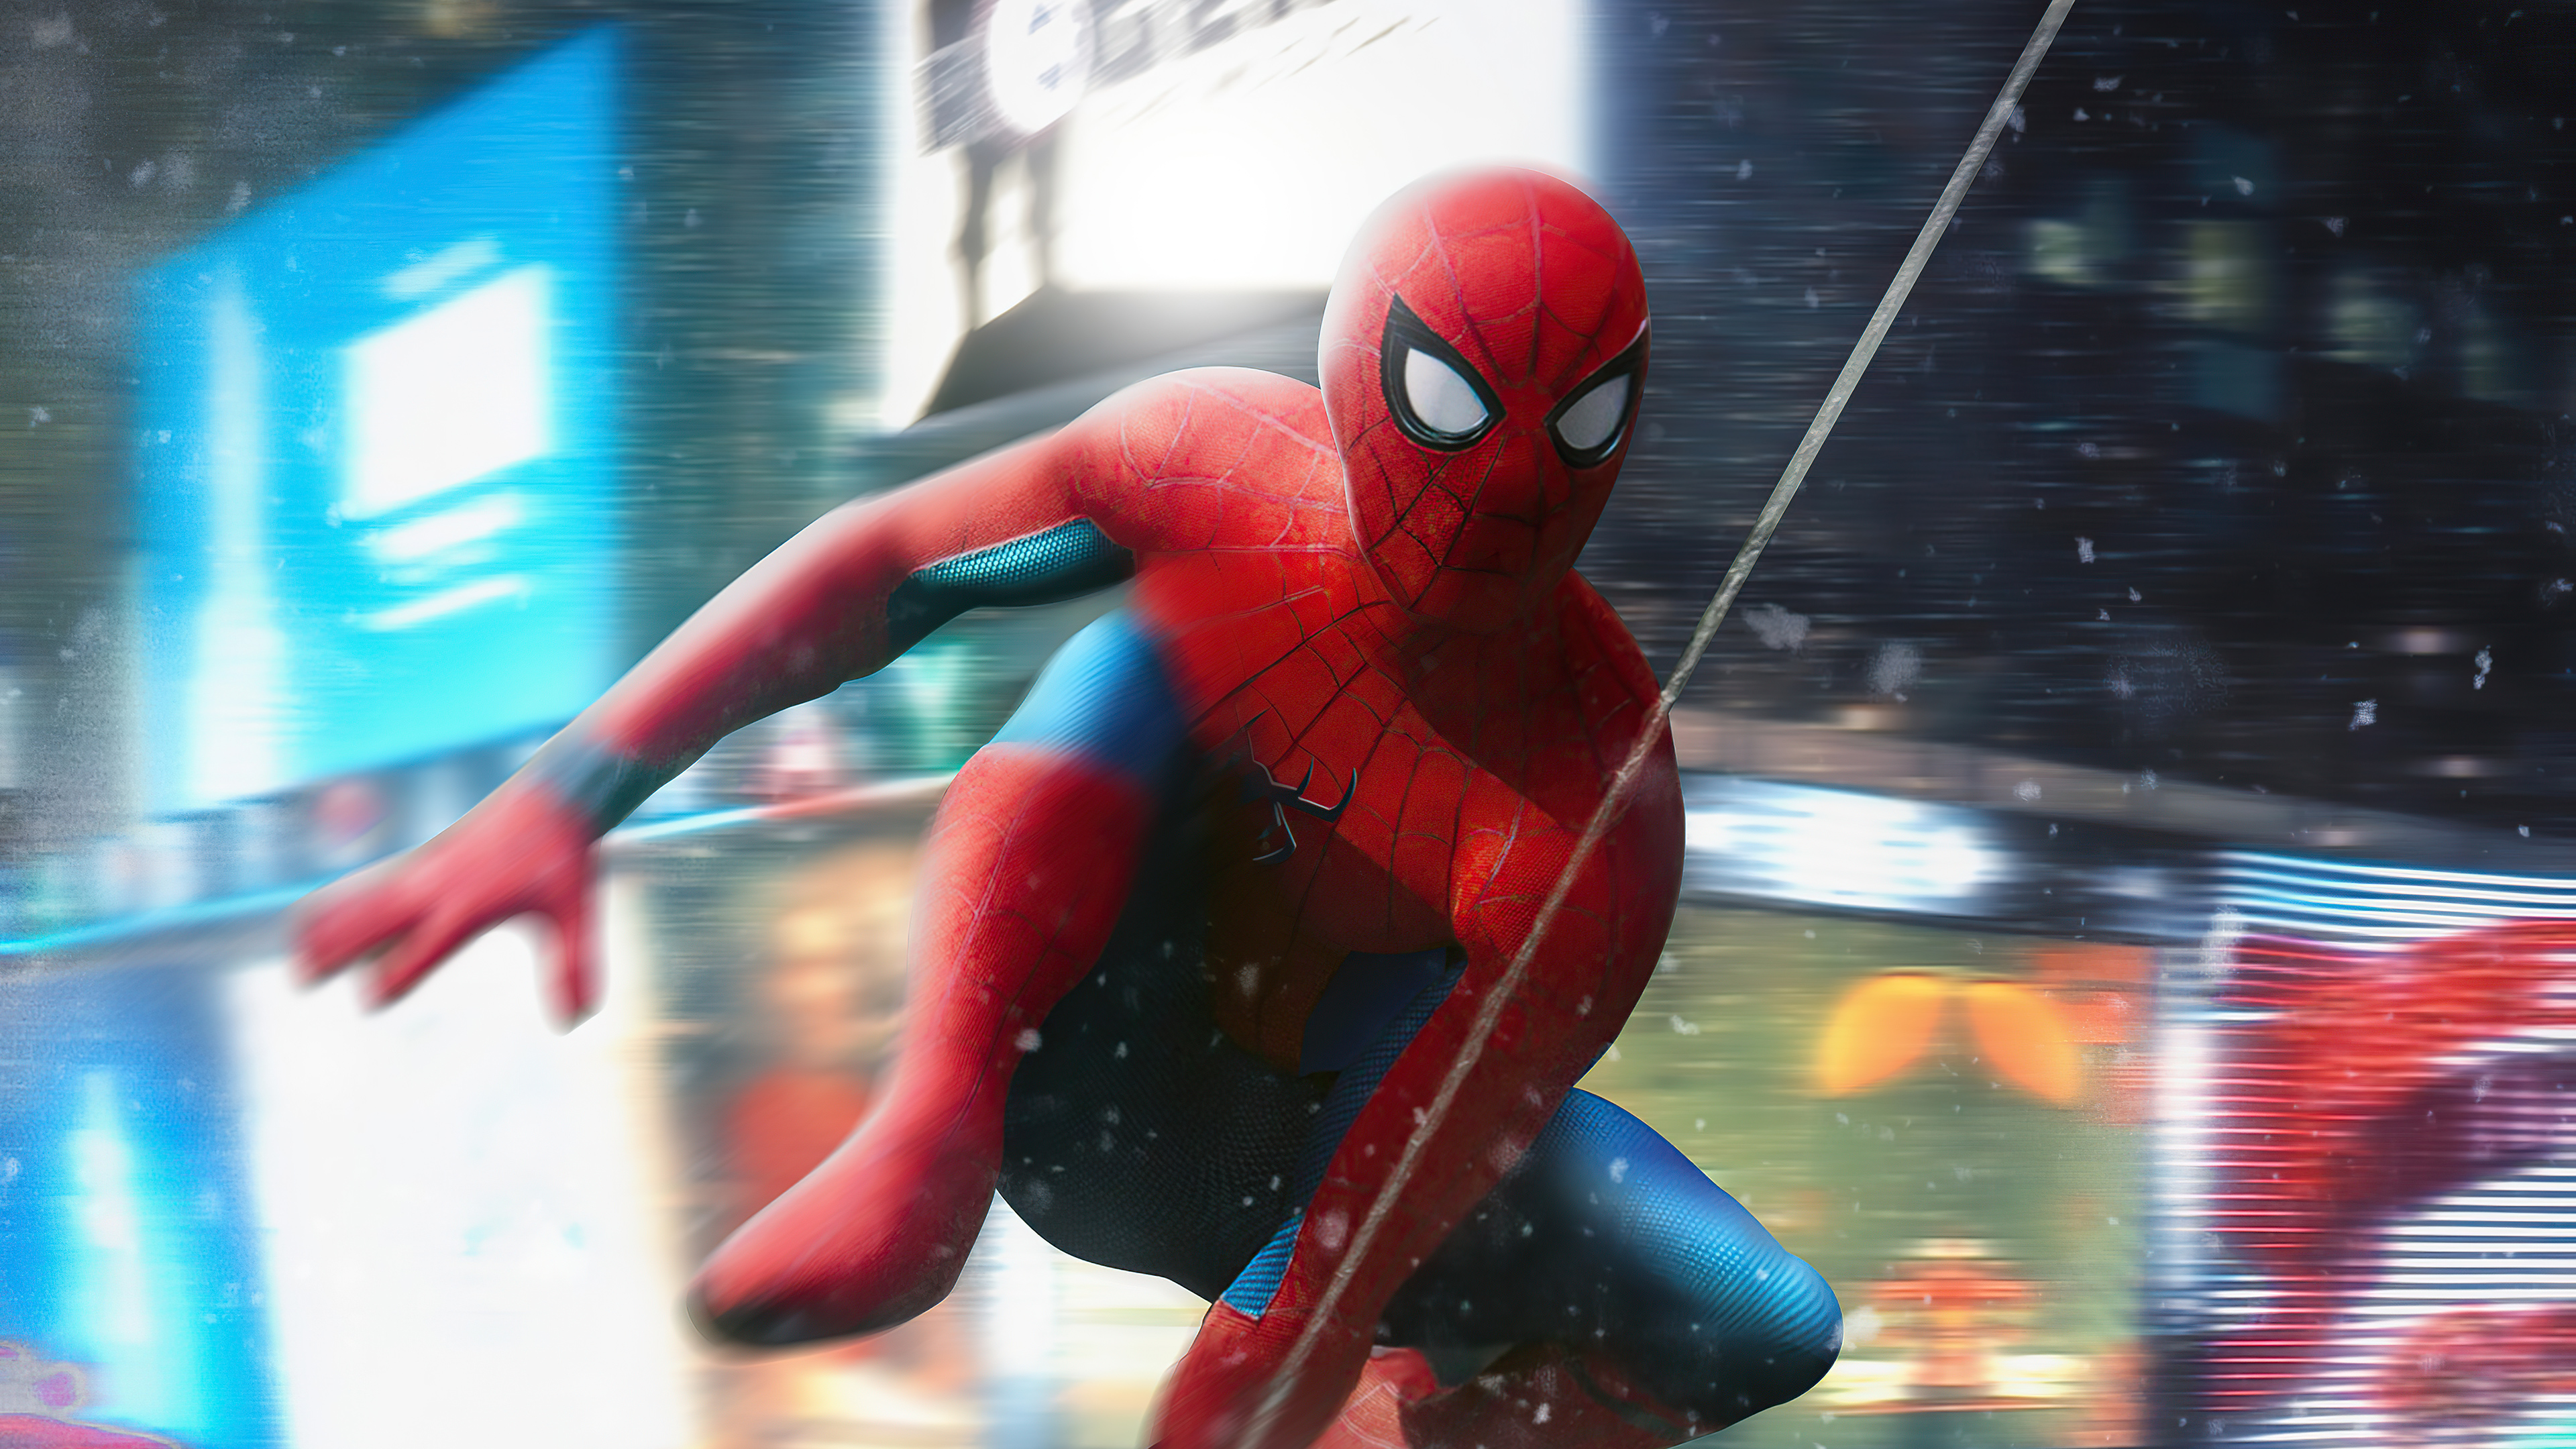 Amazing Spider-Man No Way Home 4K Wallpapers